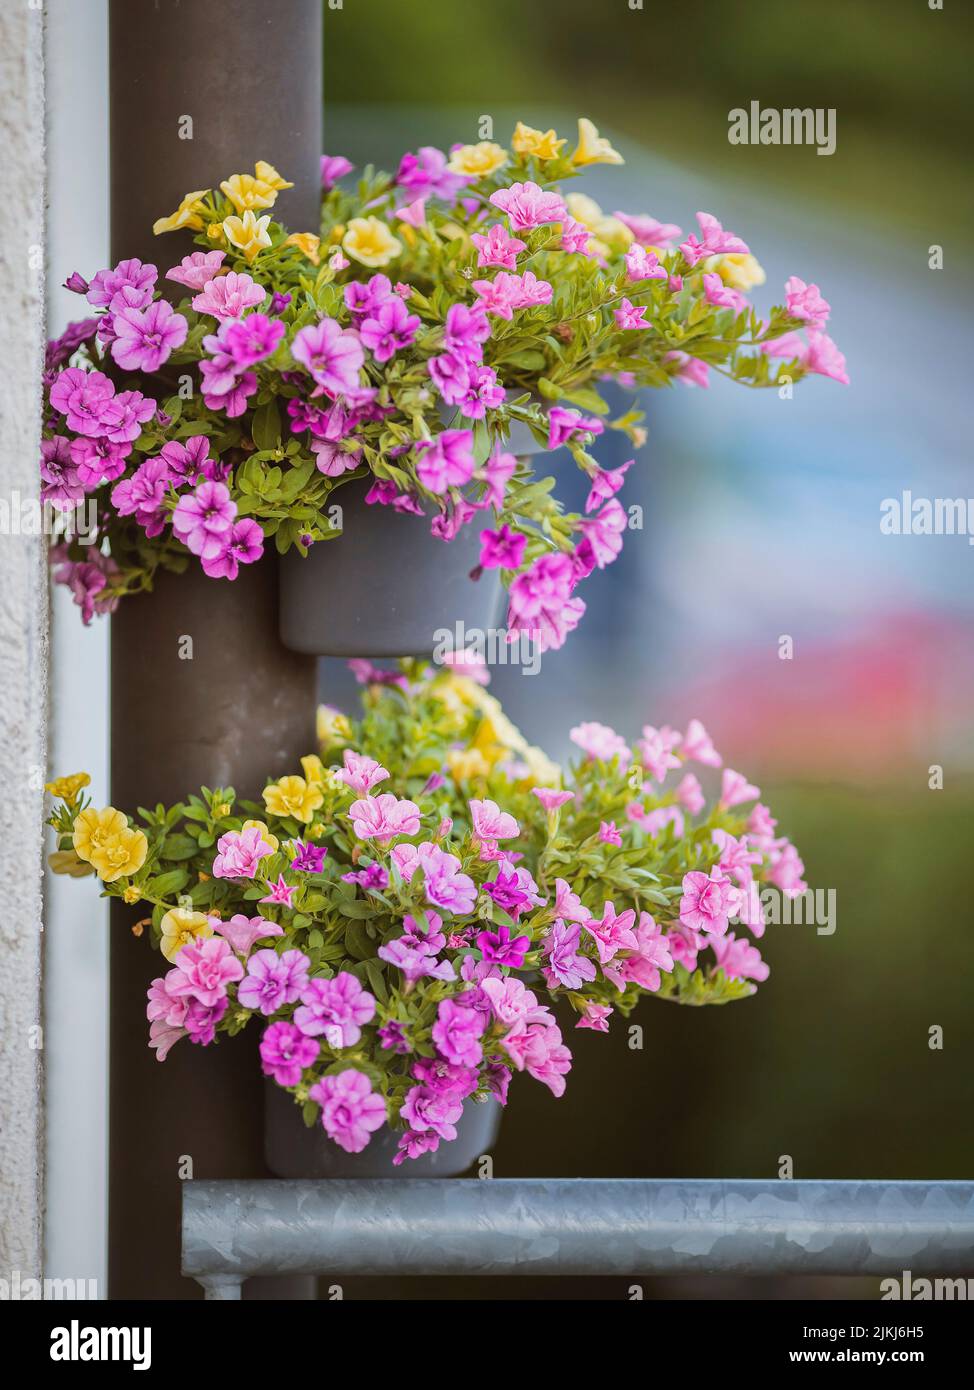 Beautify gutters with petunias Stock Photo